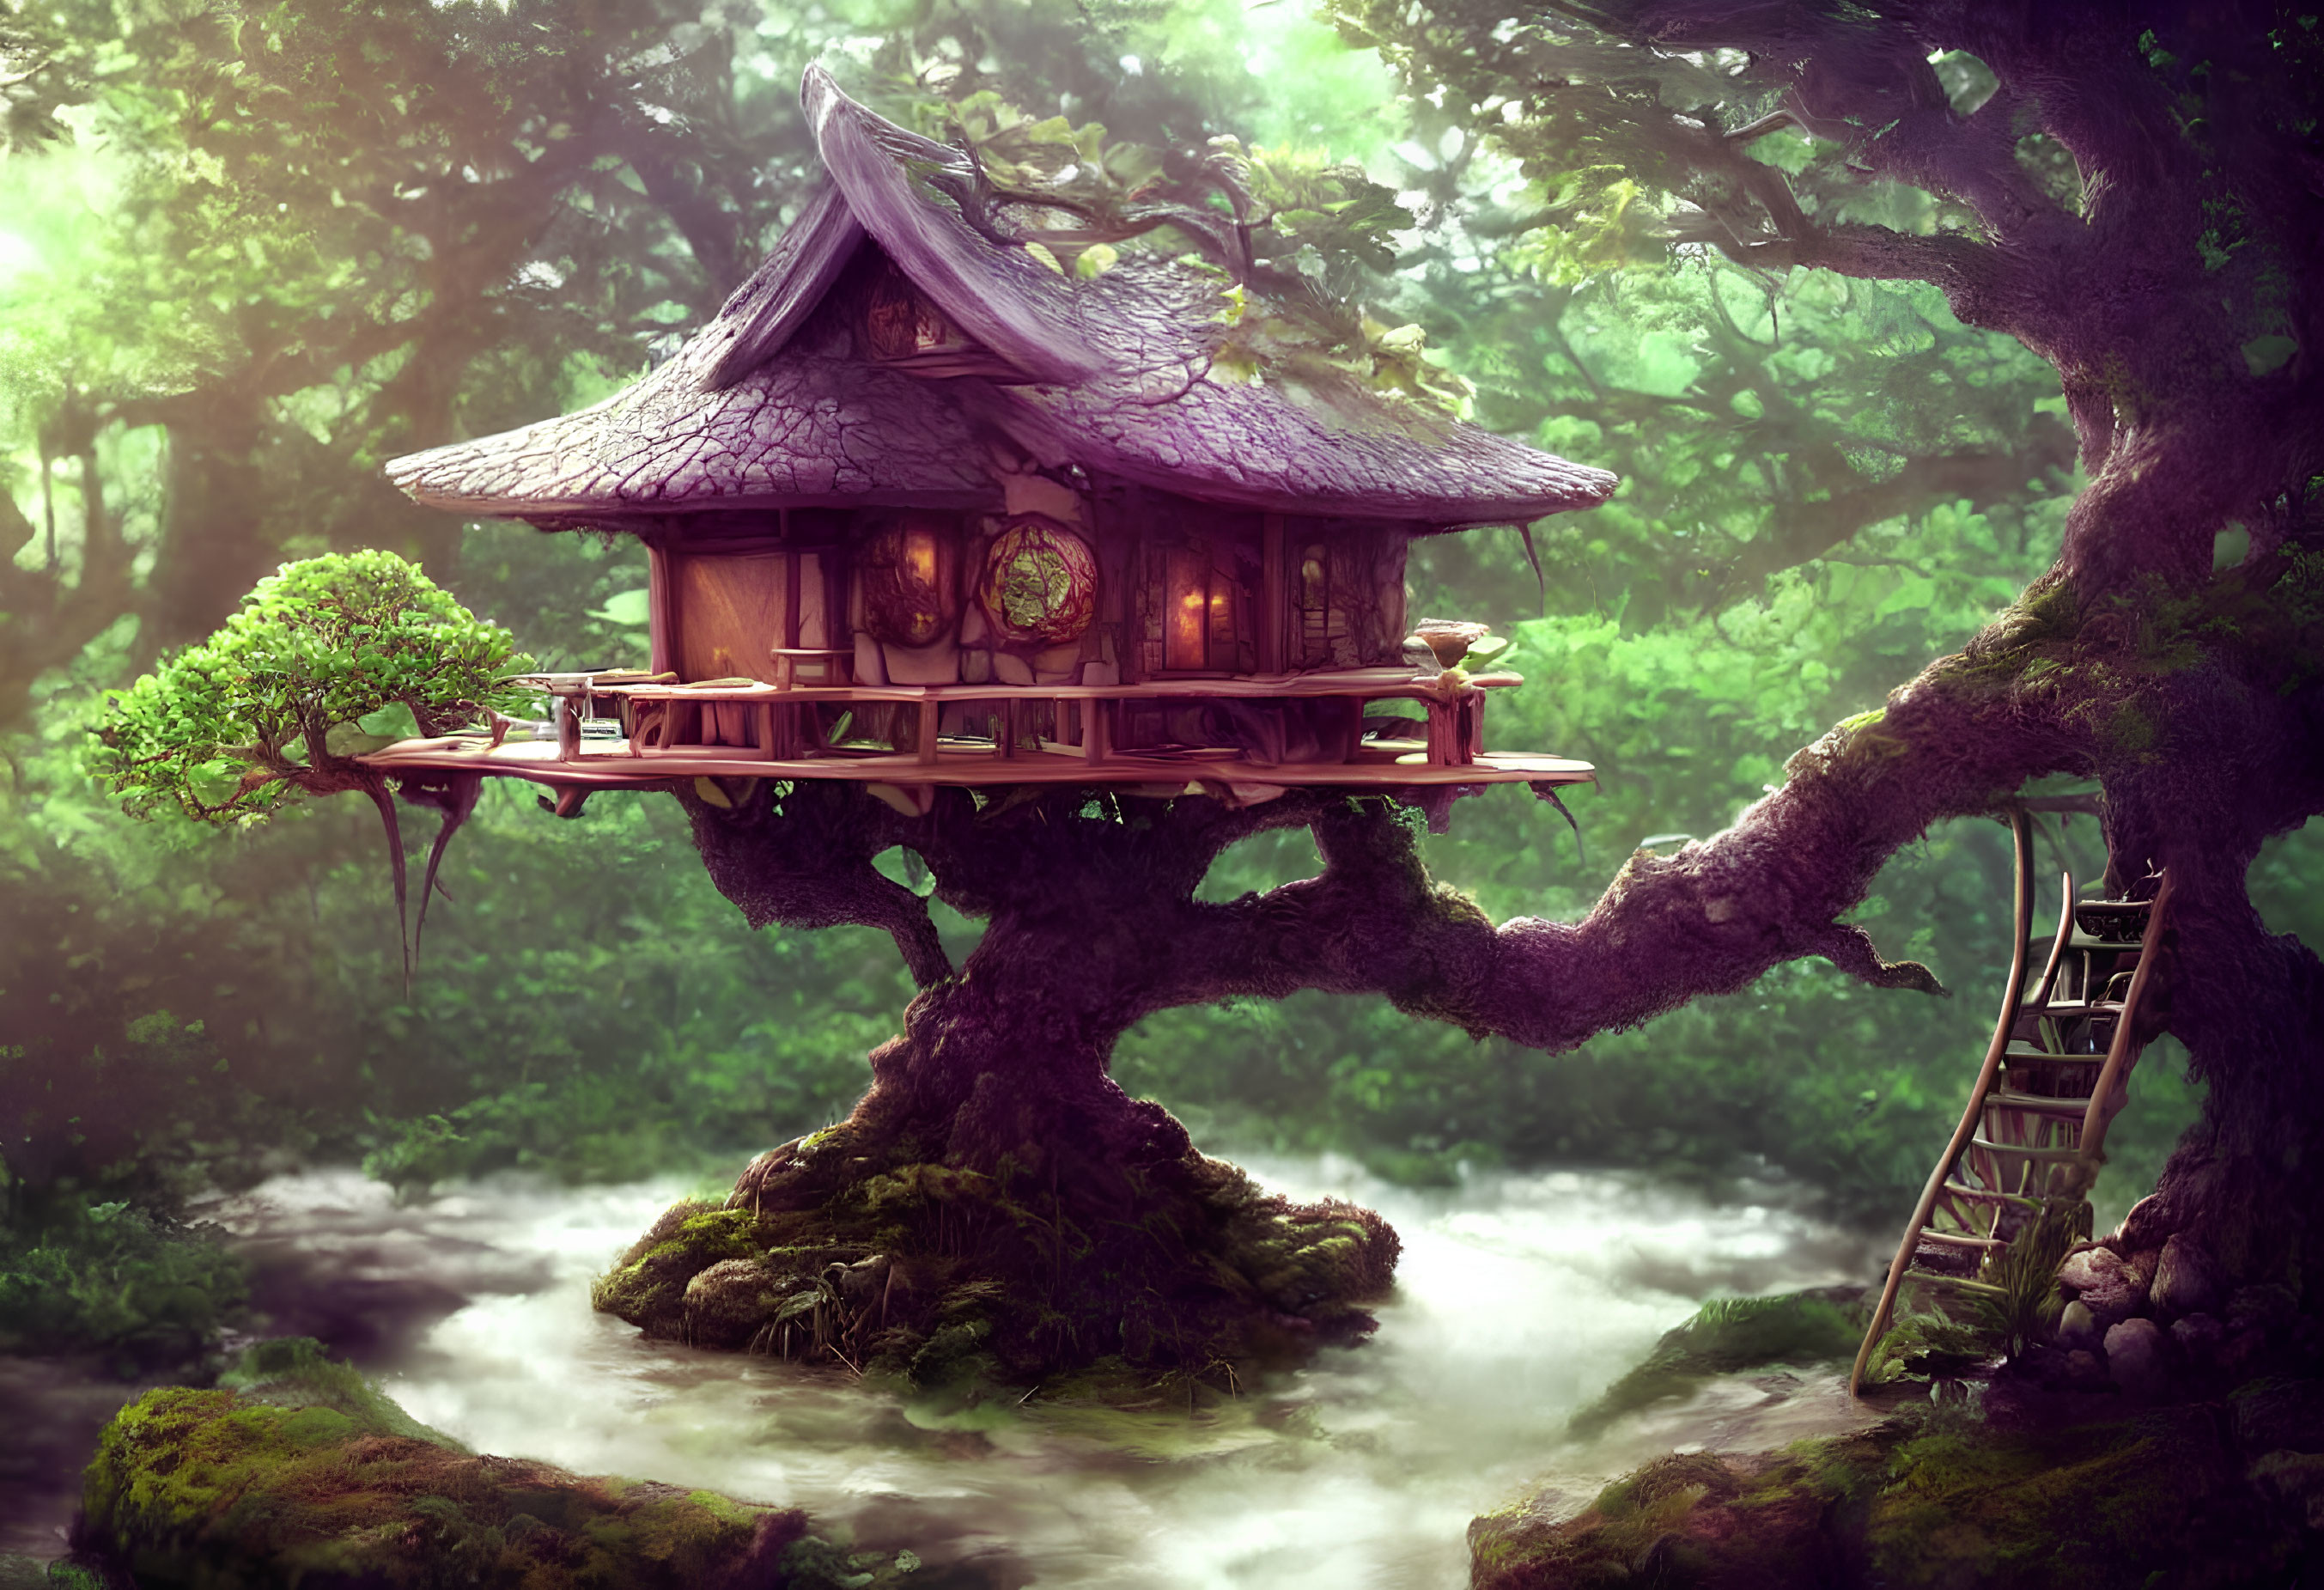 Whimsical treehouse with purple roof in misty forest landscape